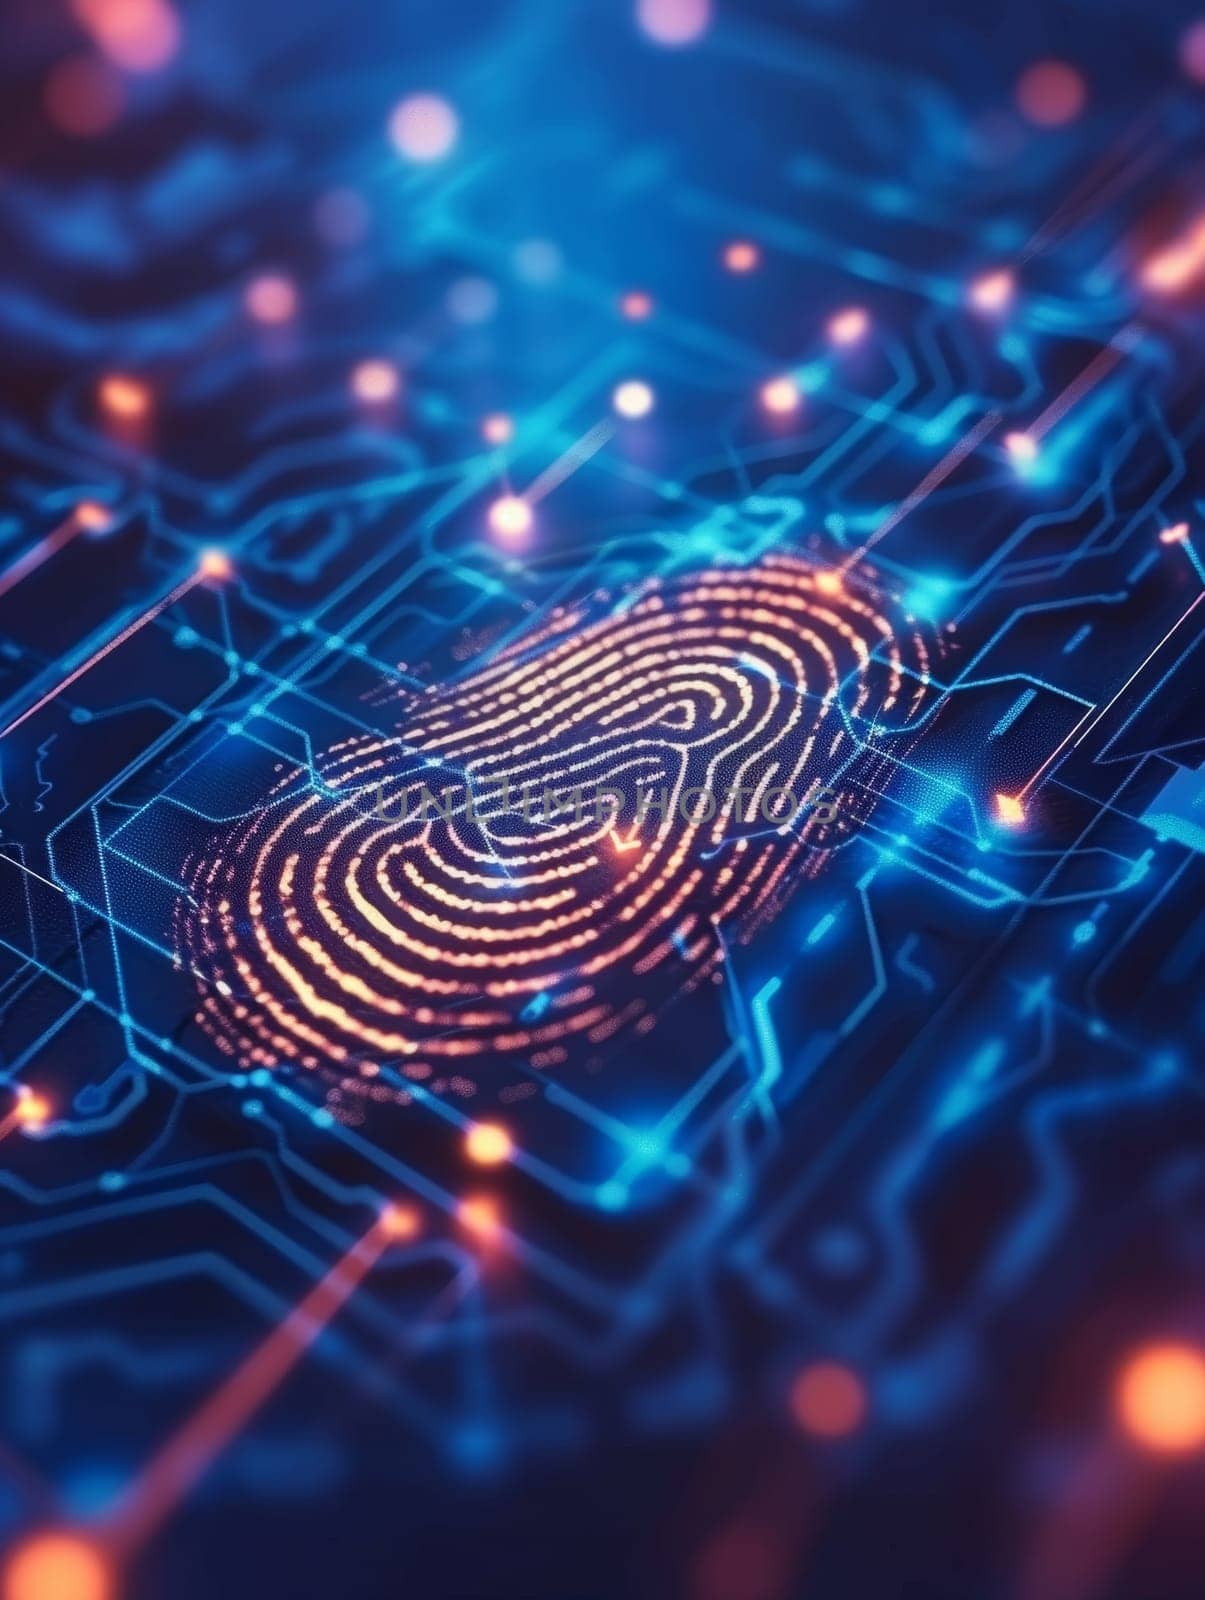 A glowing neon fingerprint on a background of blue digital circuits, illustrating themes of identity and cybersecurity in technology